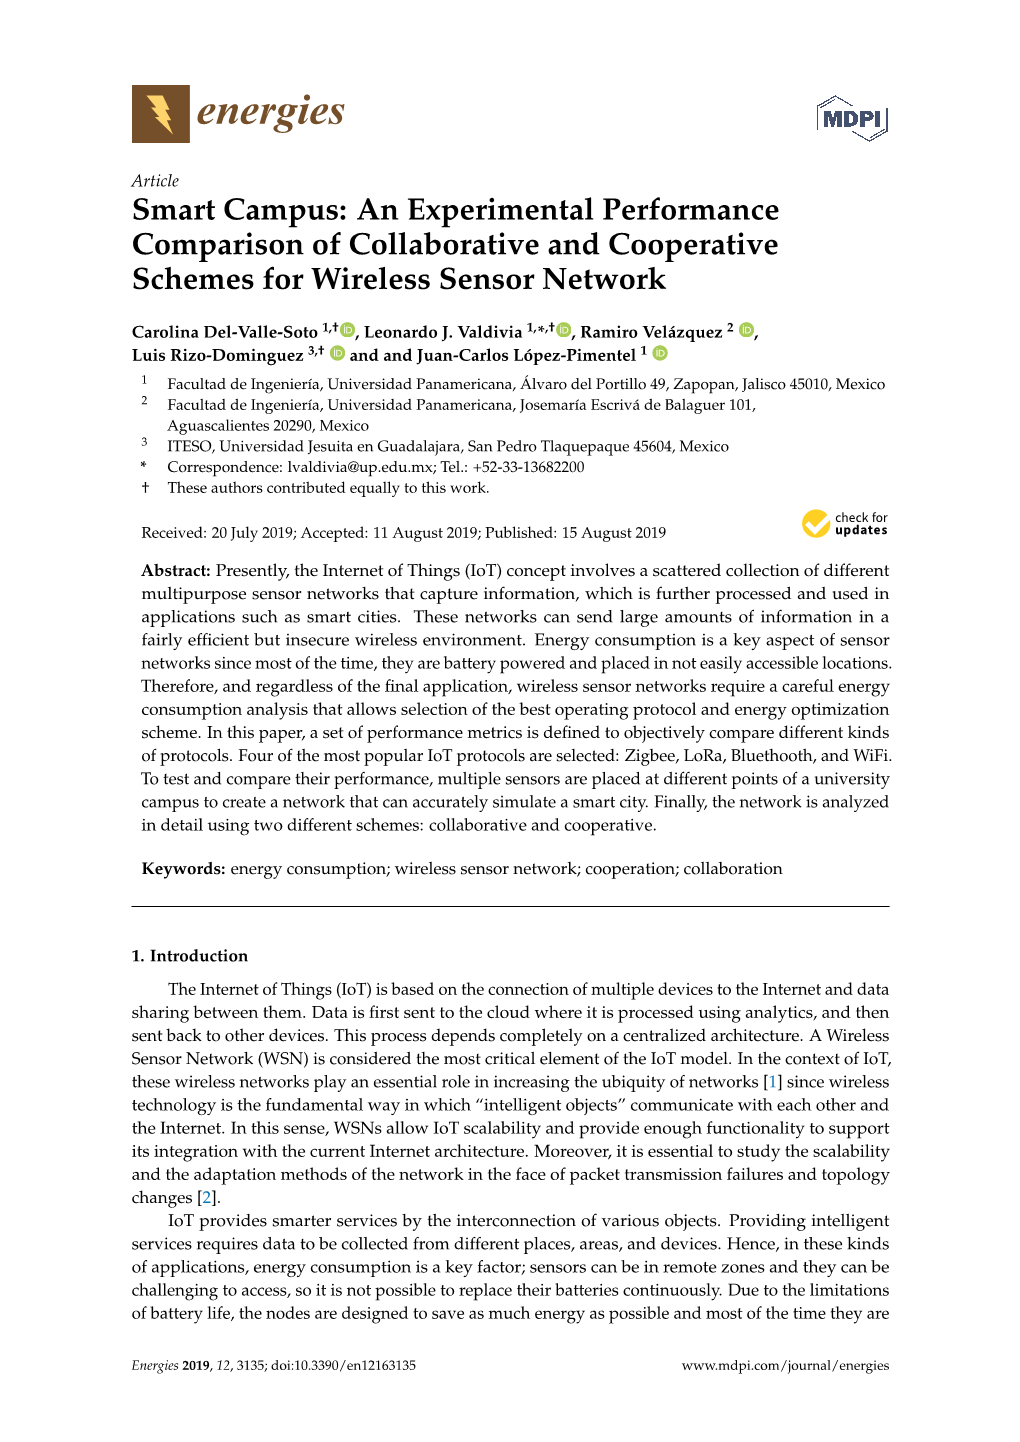 Smart Campus: an Experimental Performance Comparison of Collaborative and Cooperative Schemes for Wireless Sensor Network